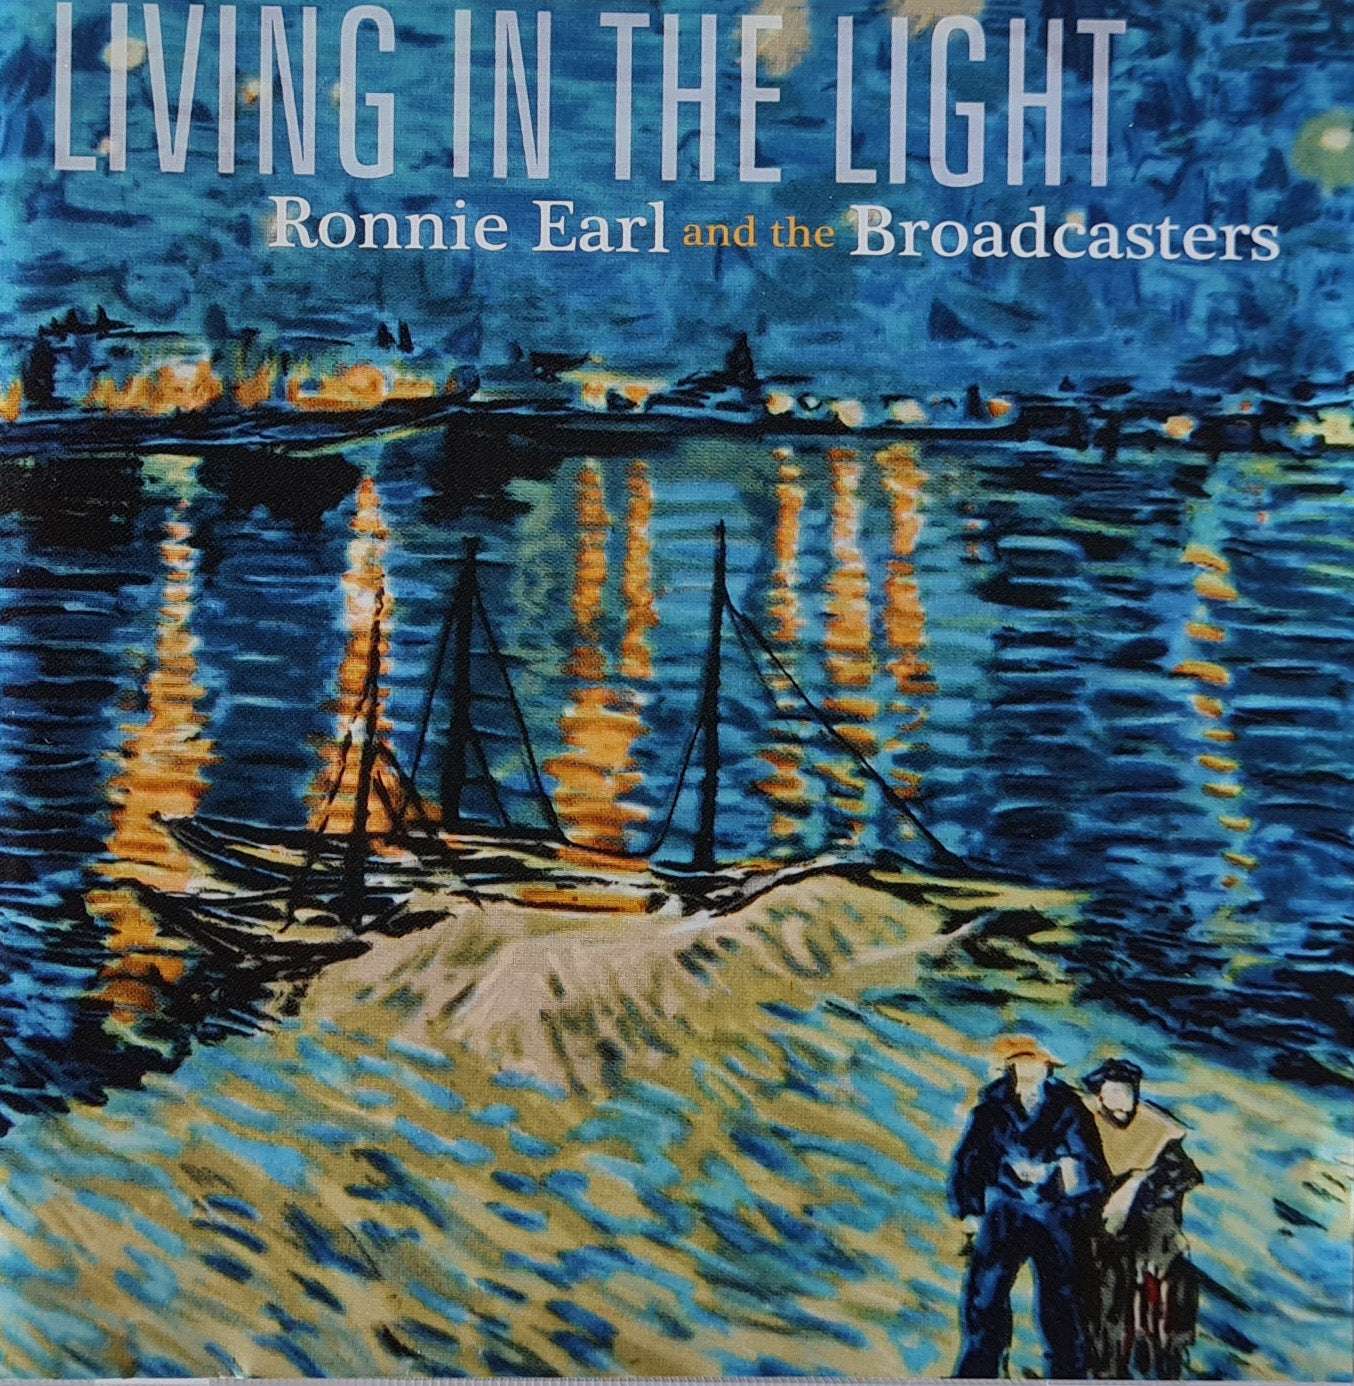 Ronnie Earl and the Broadcasters - Living in the Light (CD)